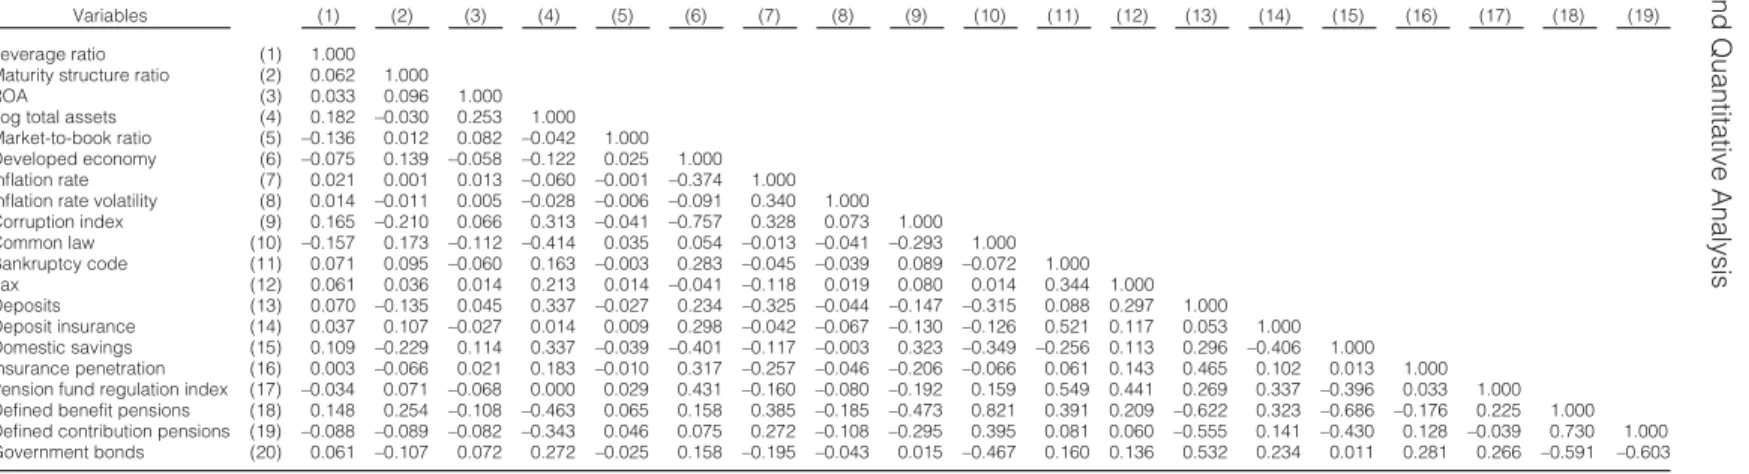 Table 3 provides a correlation matrix for our sample. Pearson correlation coefﬁcients for all independent variables, leverage, and debt maturity, together with each pairing of independent variables, are presented.